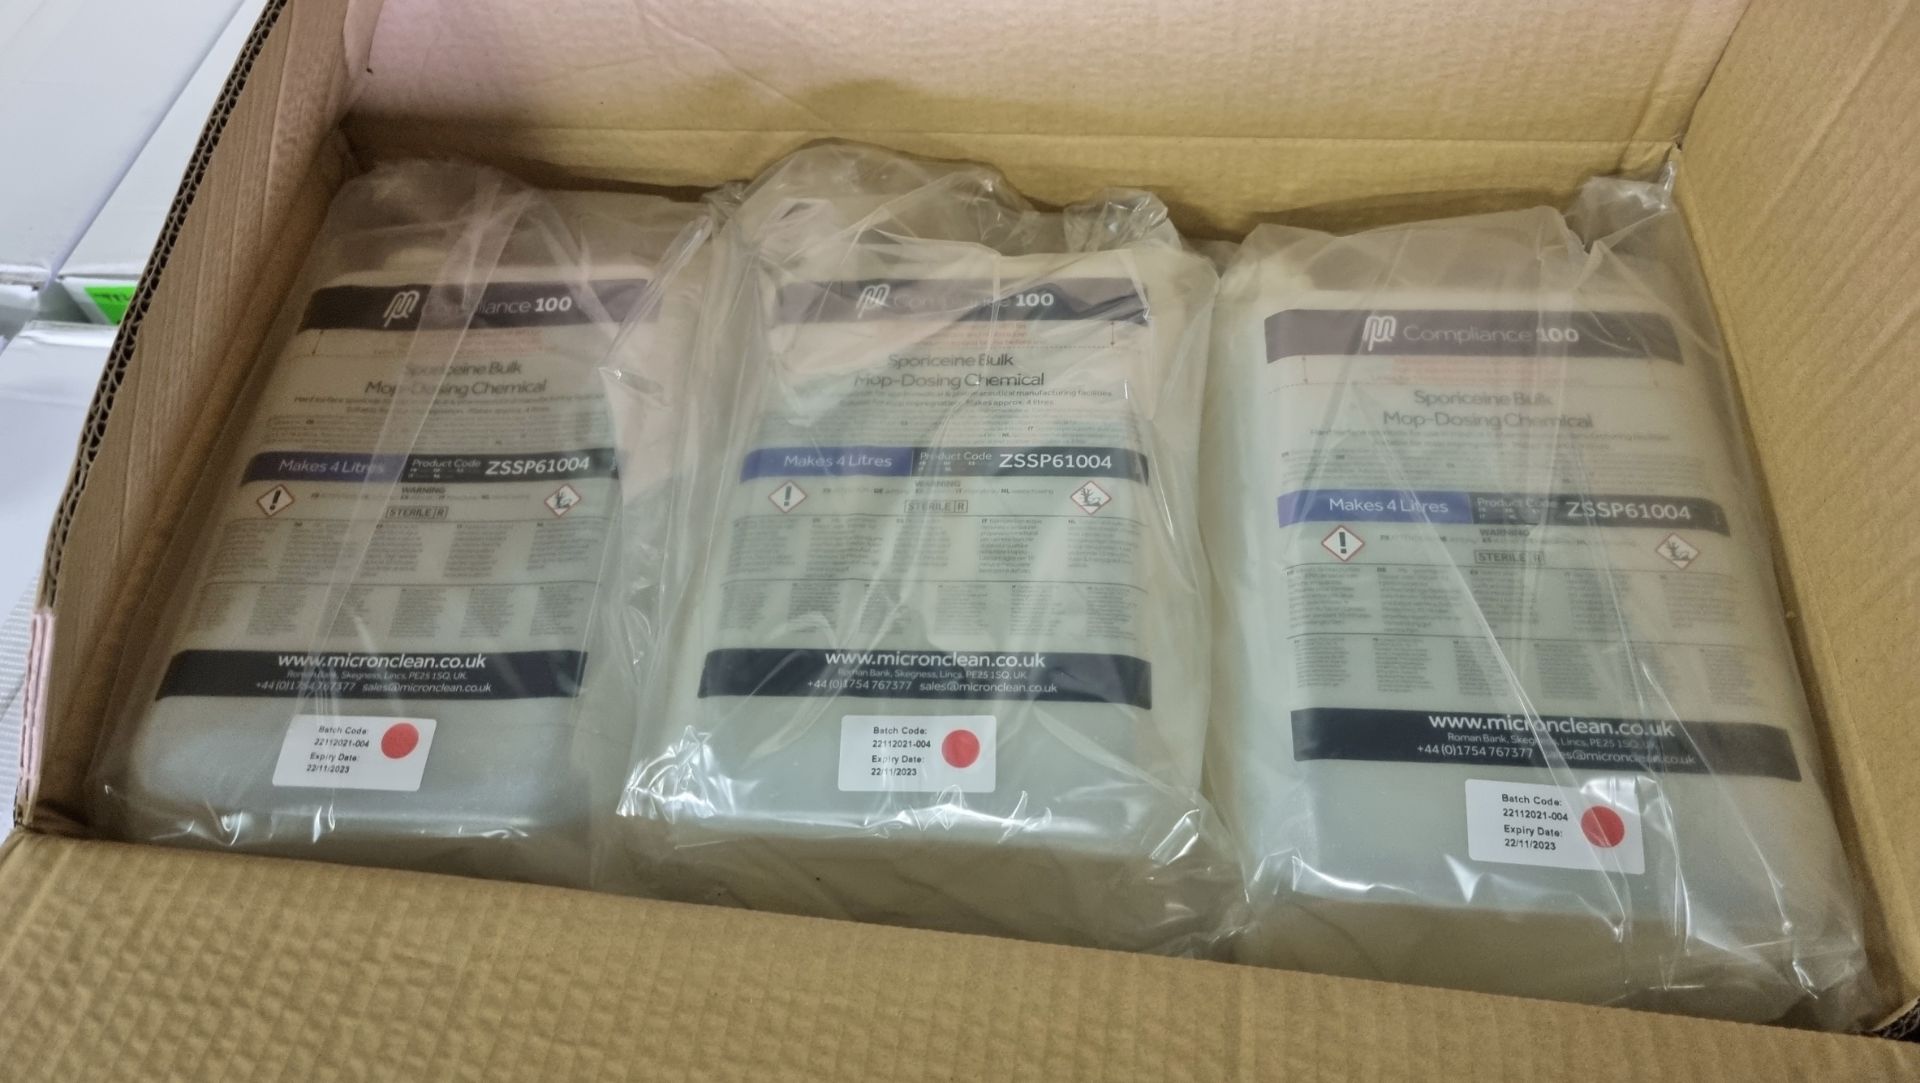 18x boxes of Sporiceine ZSSP61004 mop-dosing chemical - 9 bottles x 4 litre per box - Image 3 of 3